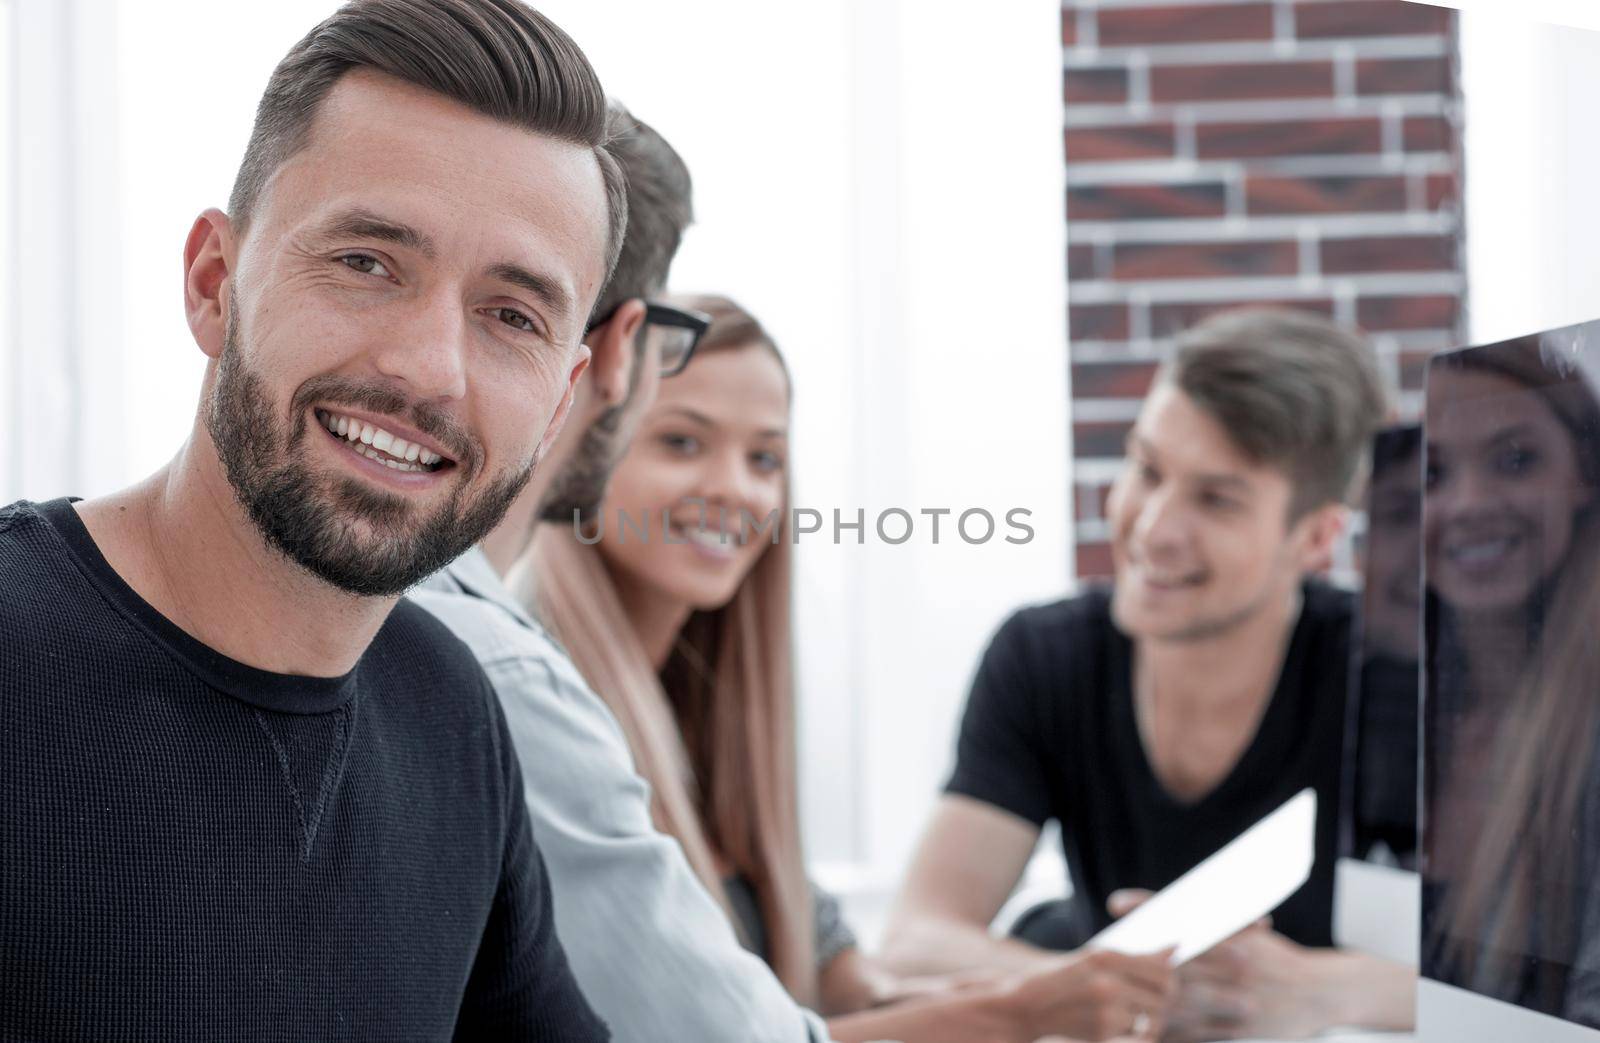 men is smiling during break, near modern office center. Young businessman lifestyle portrait. Technology and online communication concept